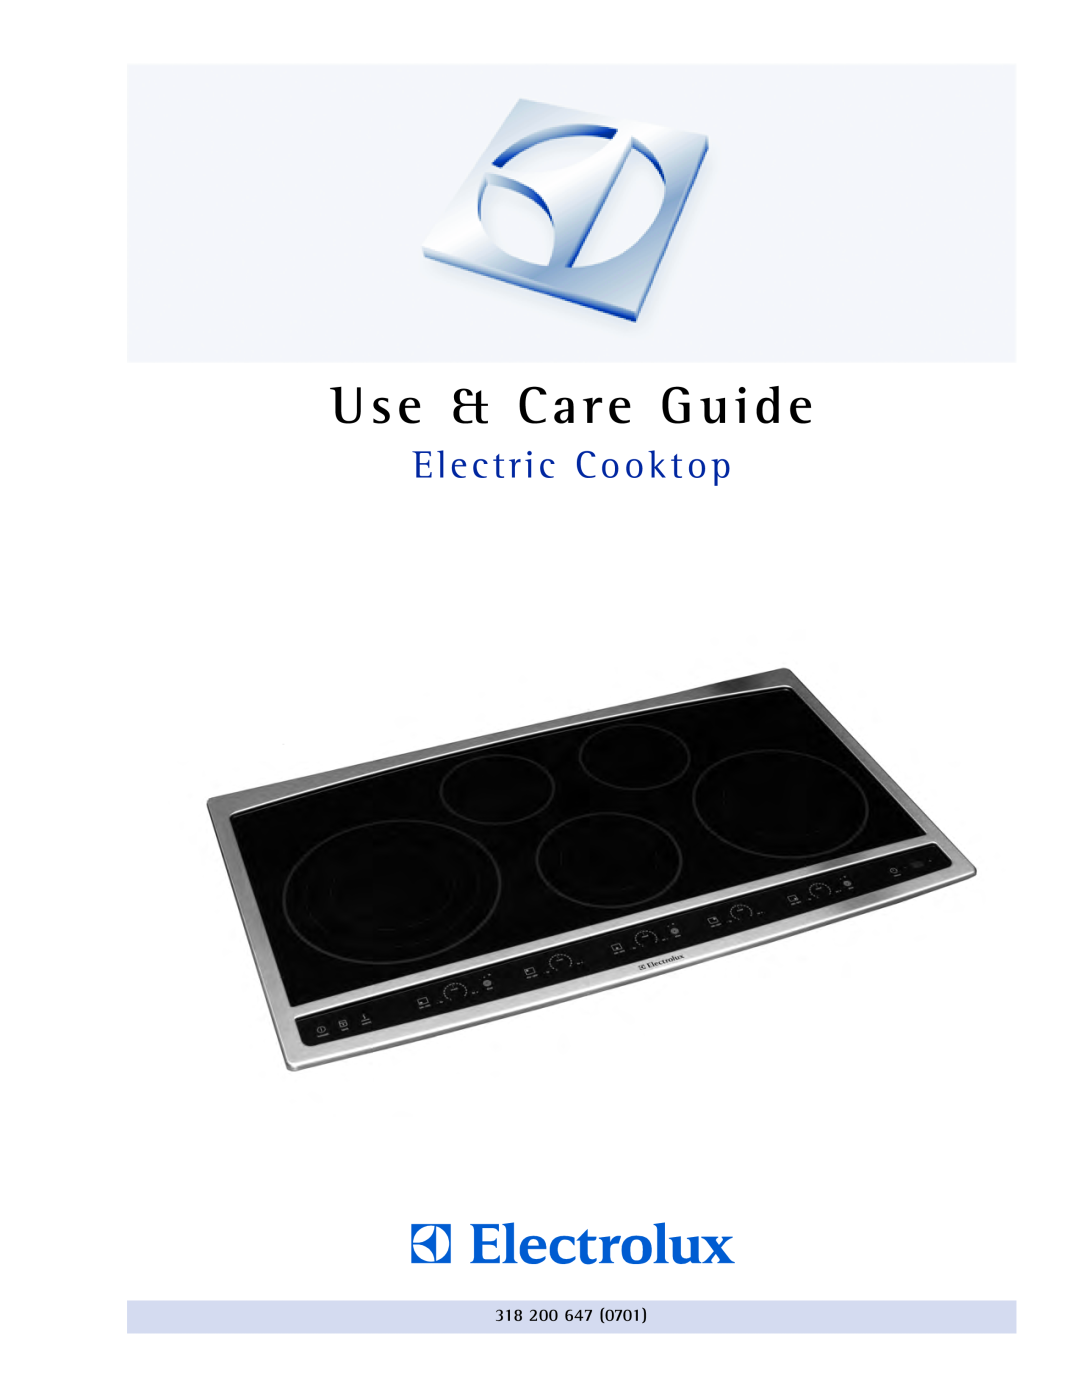 Electrolux 36 manual Use & Care Guide, Electric Cooktop 